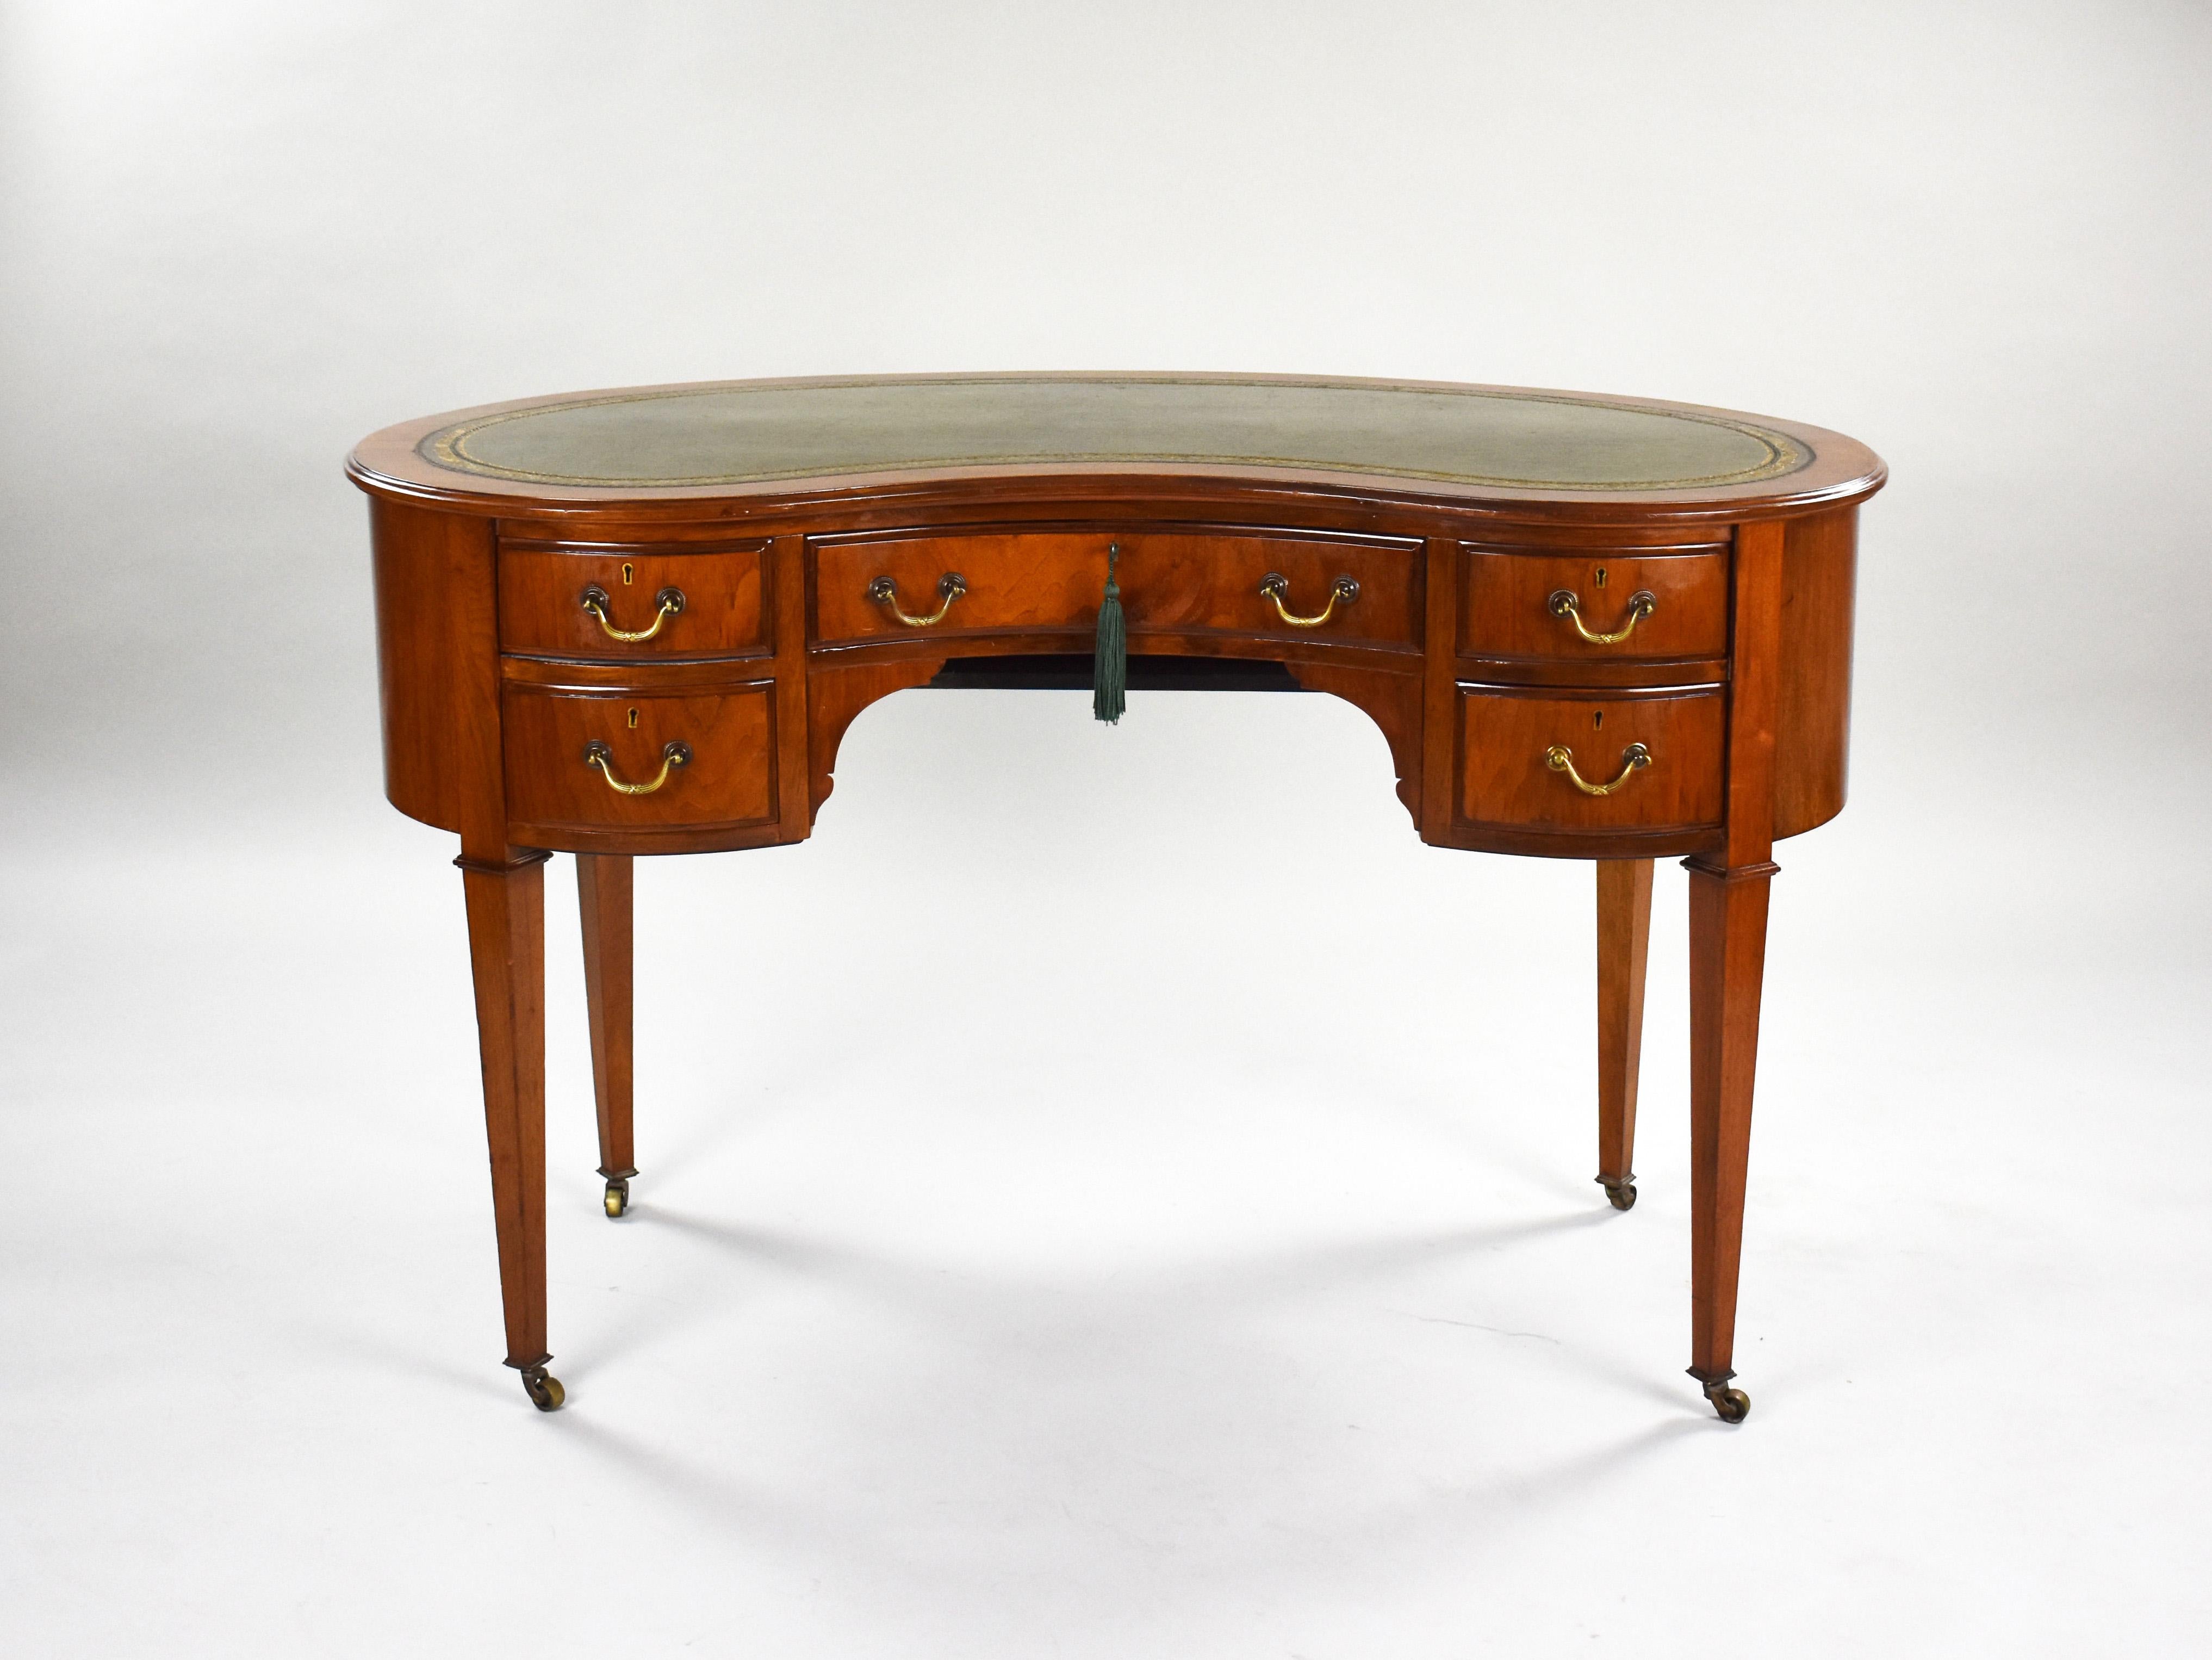 For sale is a good quality Edwardian mahogany kidney shaped desk. The top having a green leather insert above five drawers. The desk stands on tapered legs terminating on castors. This piece is in very good condition, showing minor signs of wear